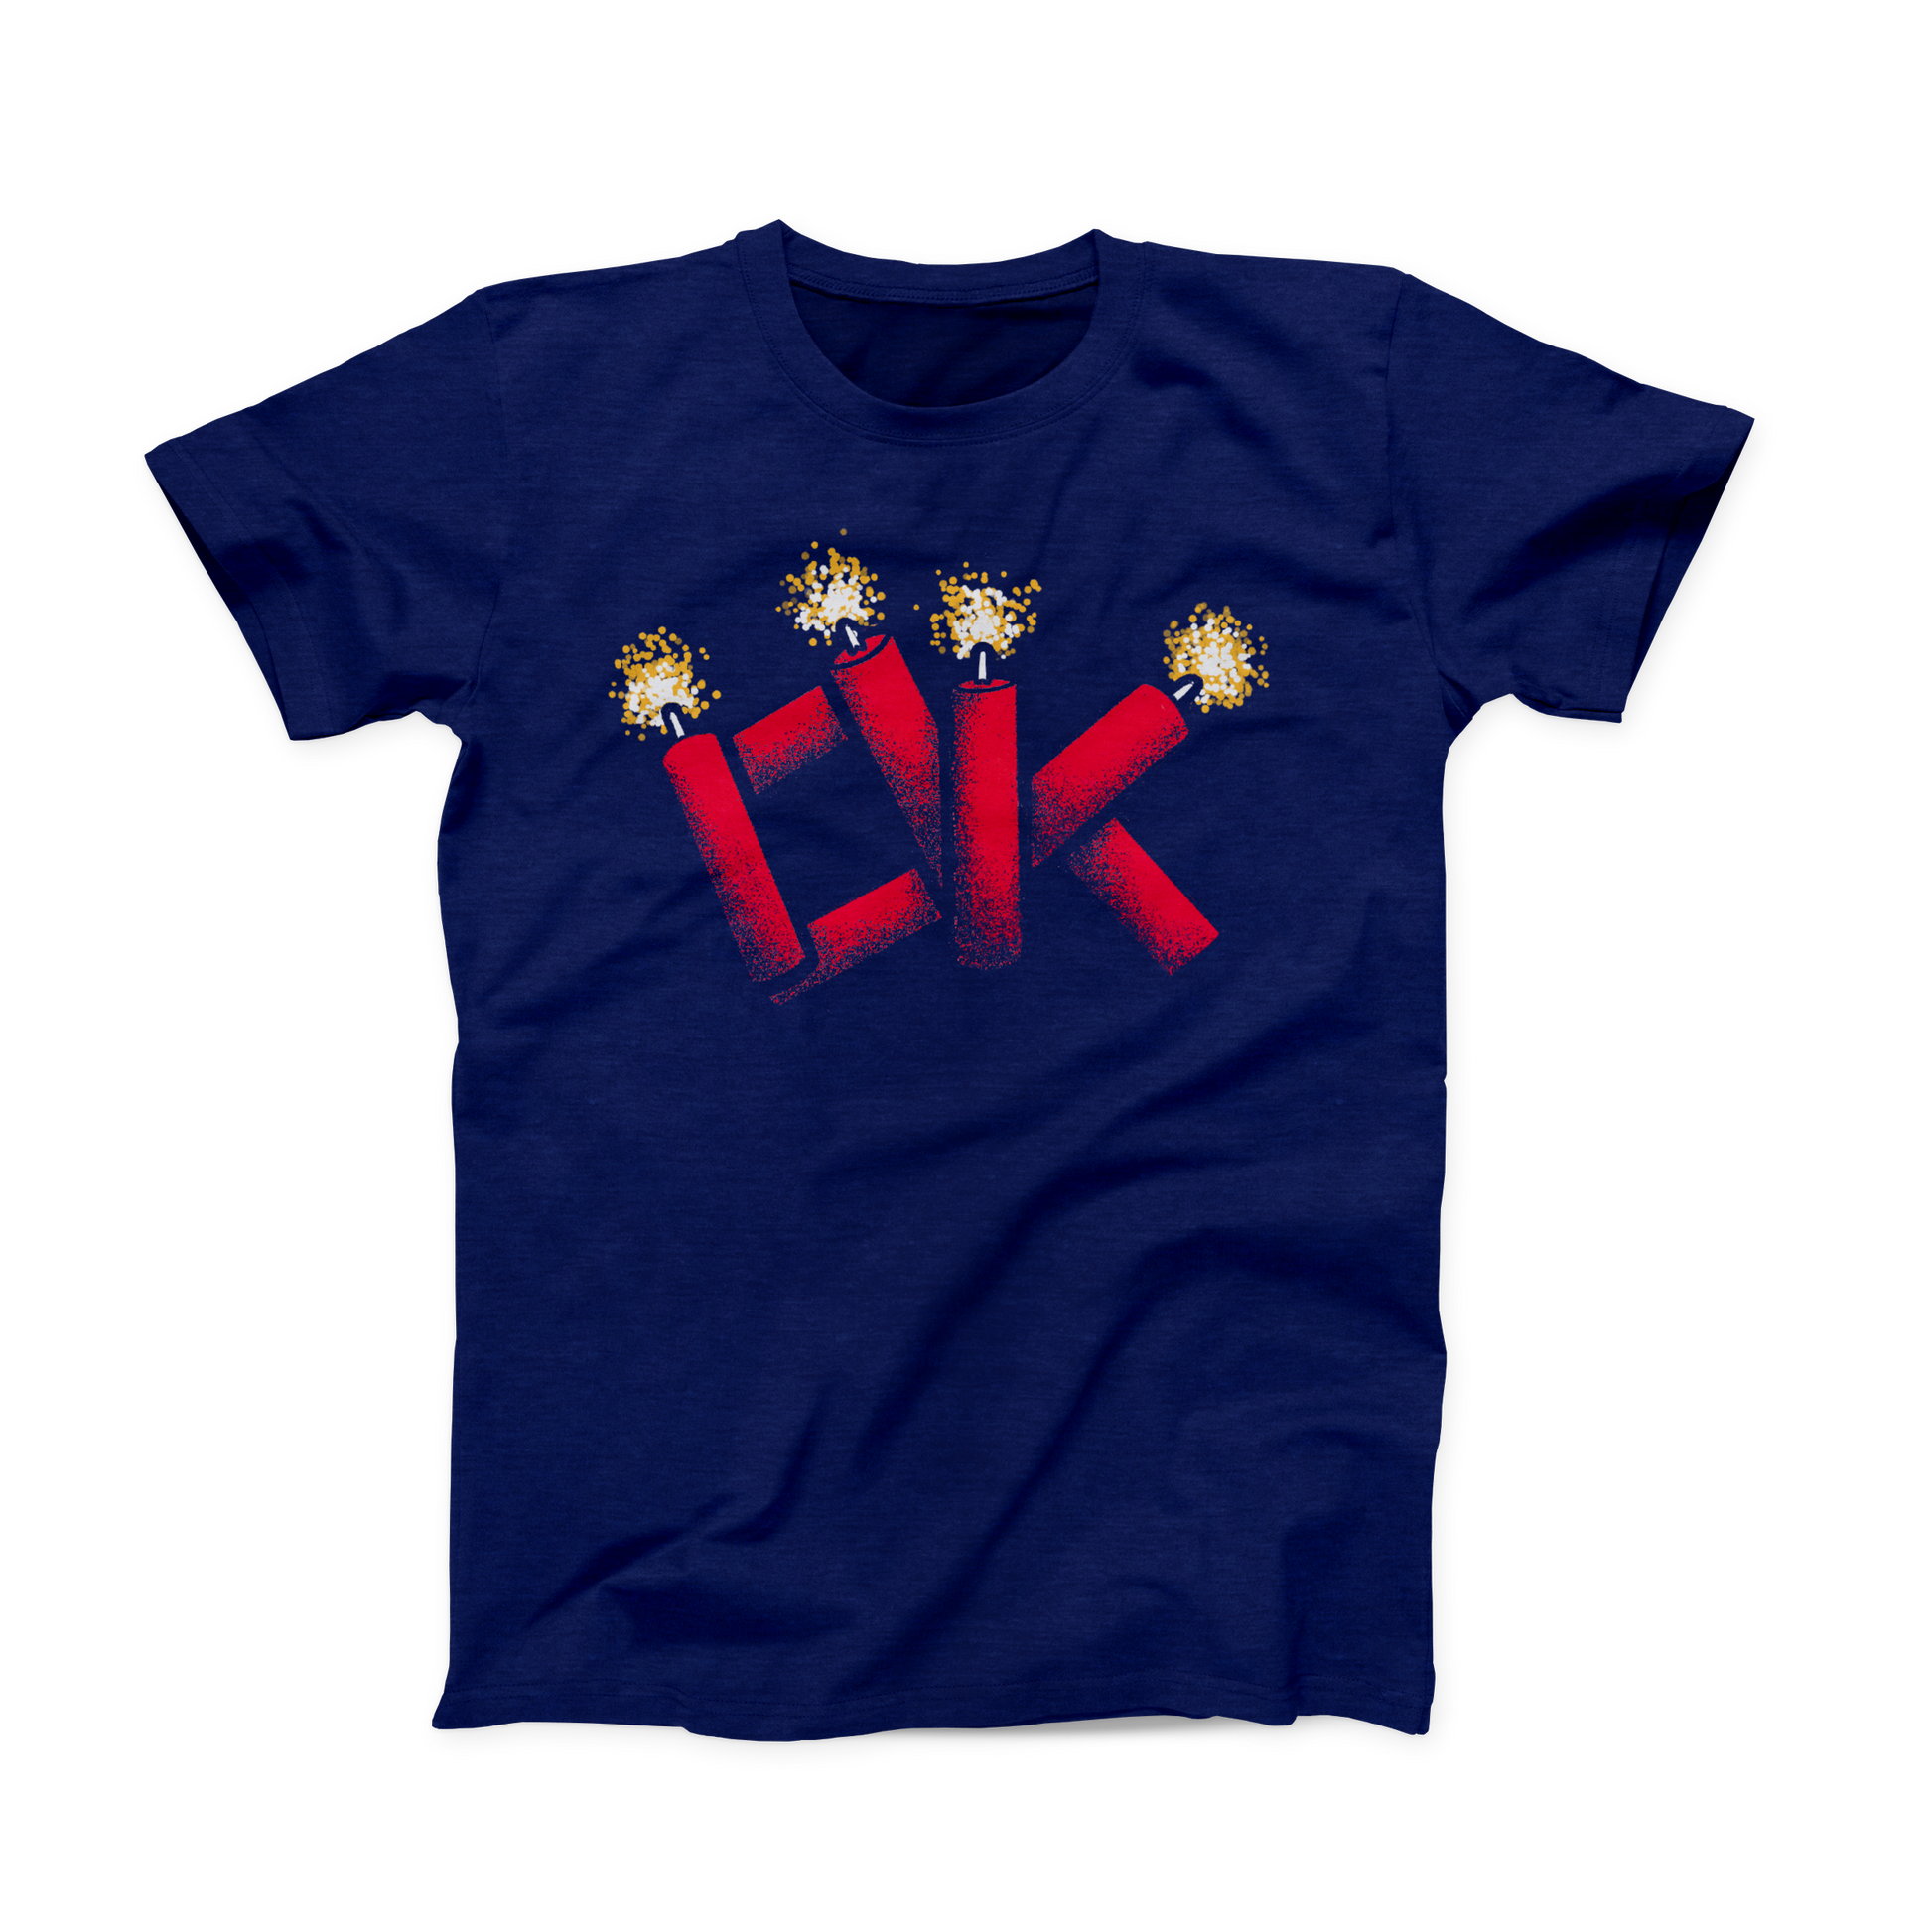 Navy colored Oklahoma T-shirt. Screen printed across the chest is "OK" made out of red firecrackers, the tops of which are lit in a yellow and white spark.